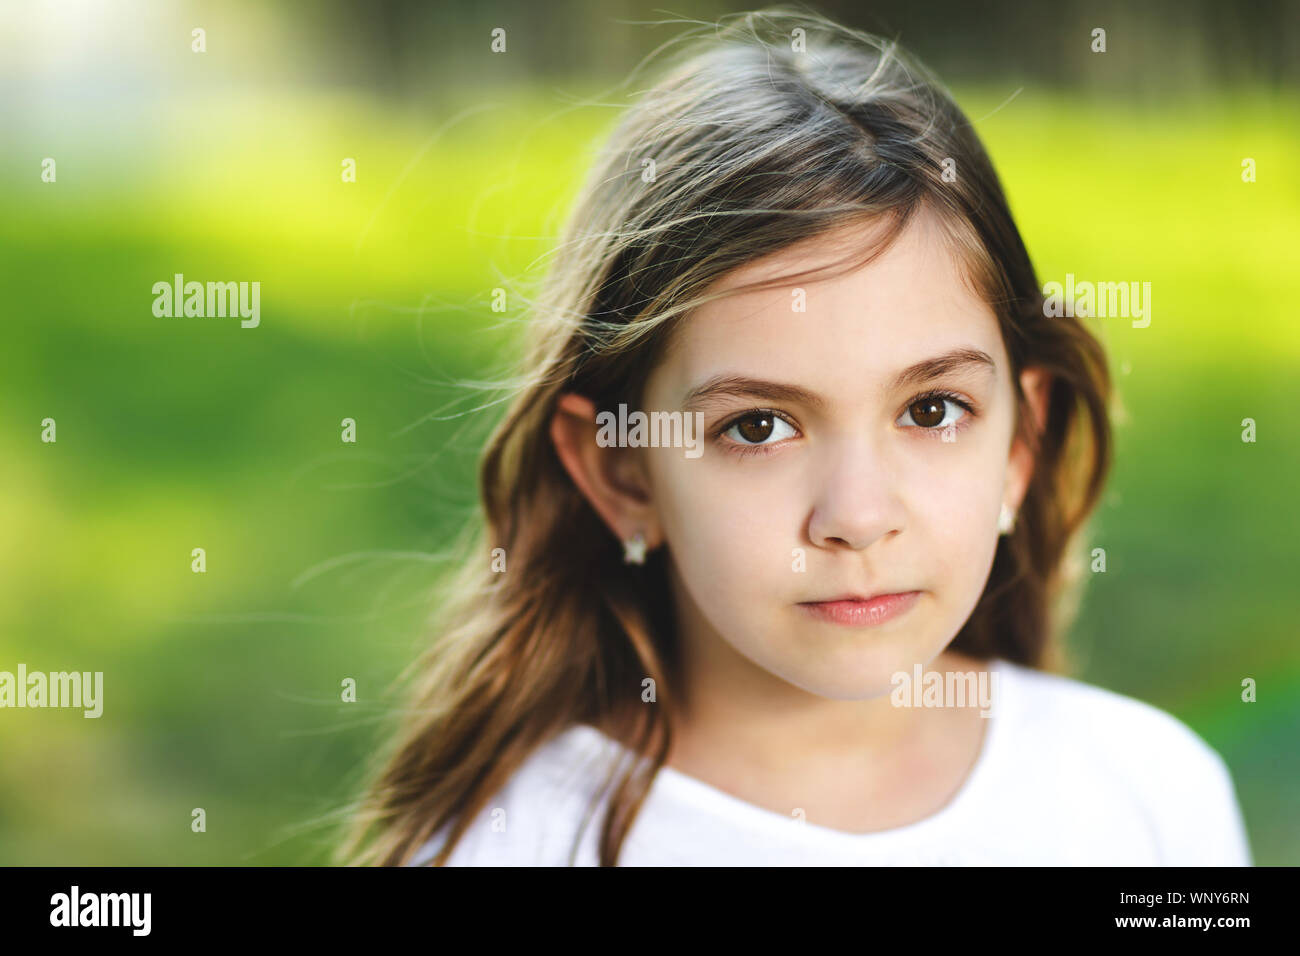 Portrait of young beautiful girl Stock Photo